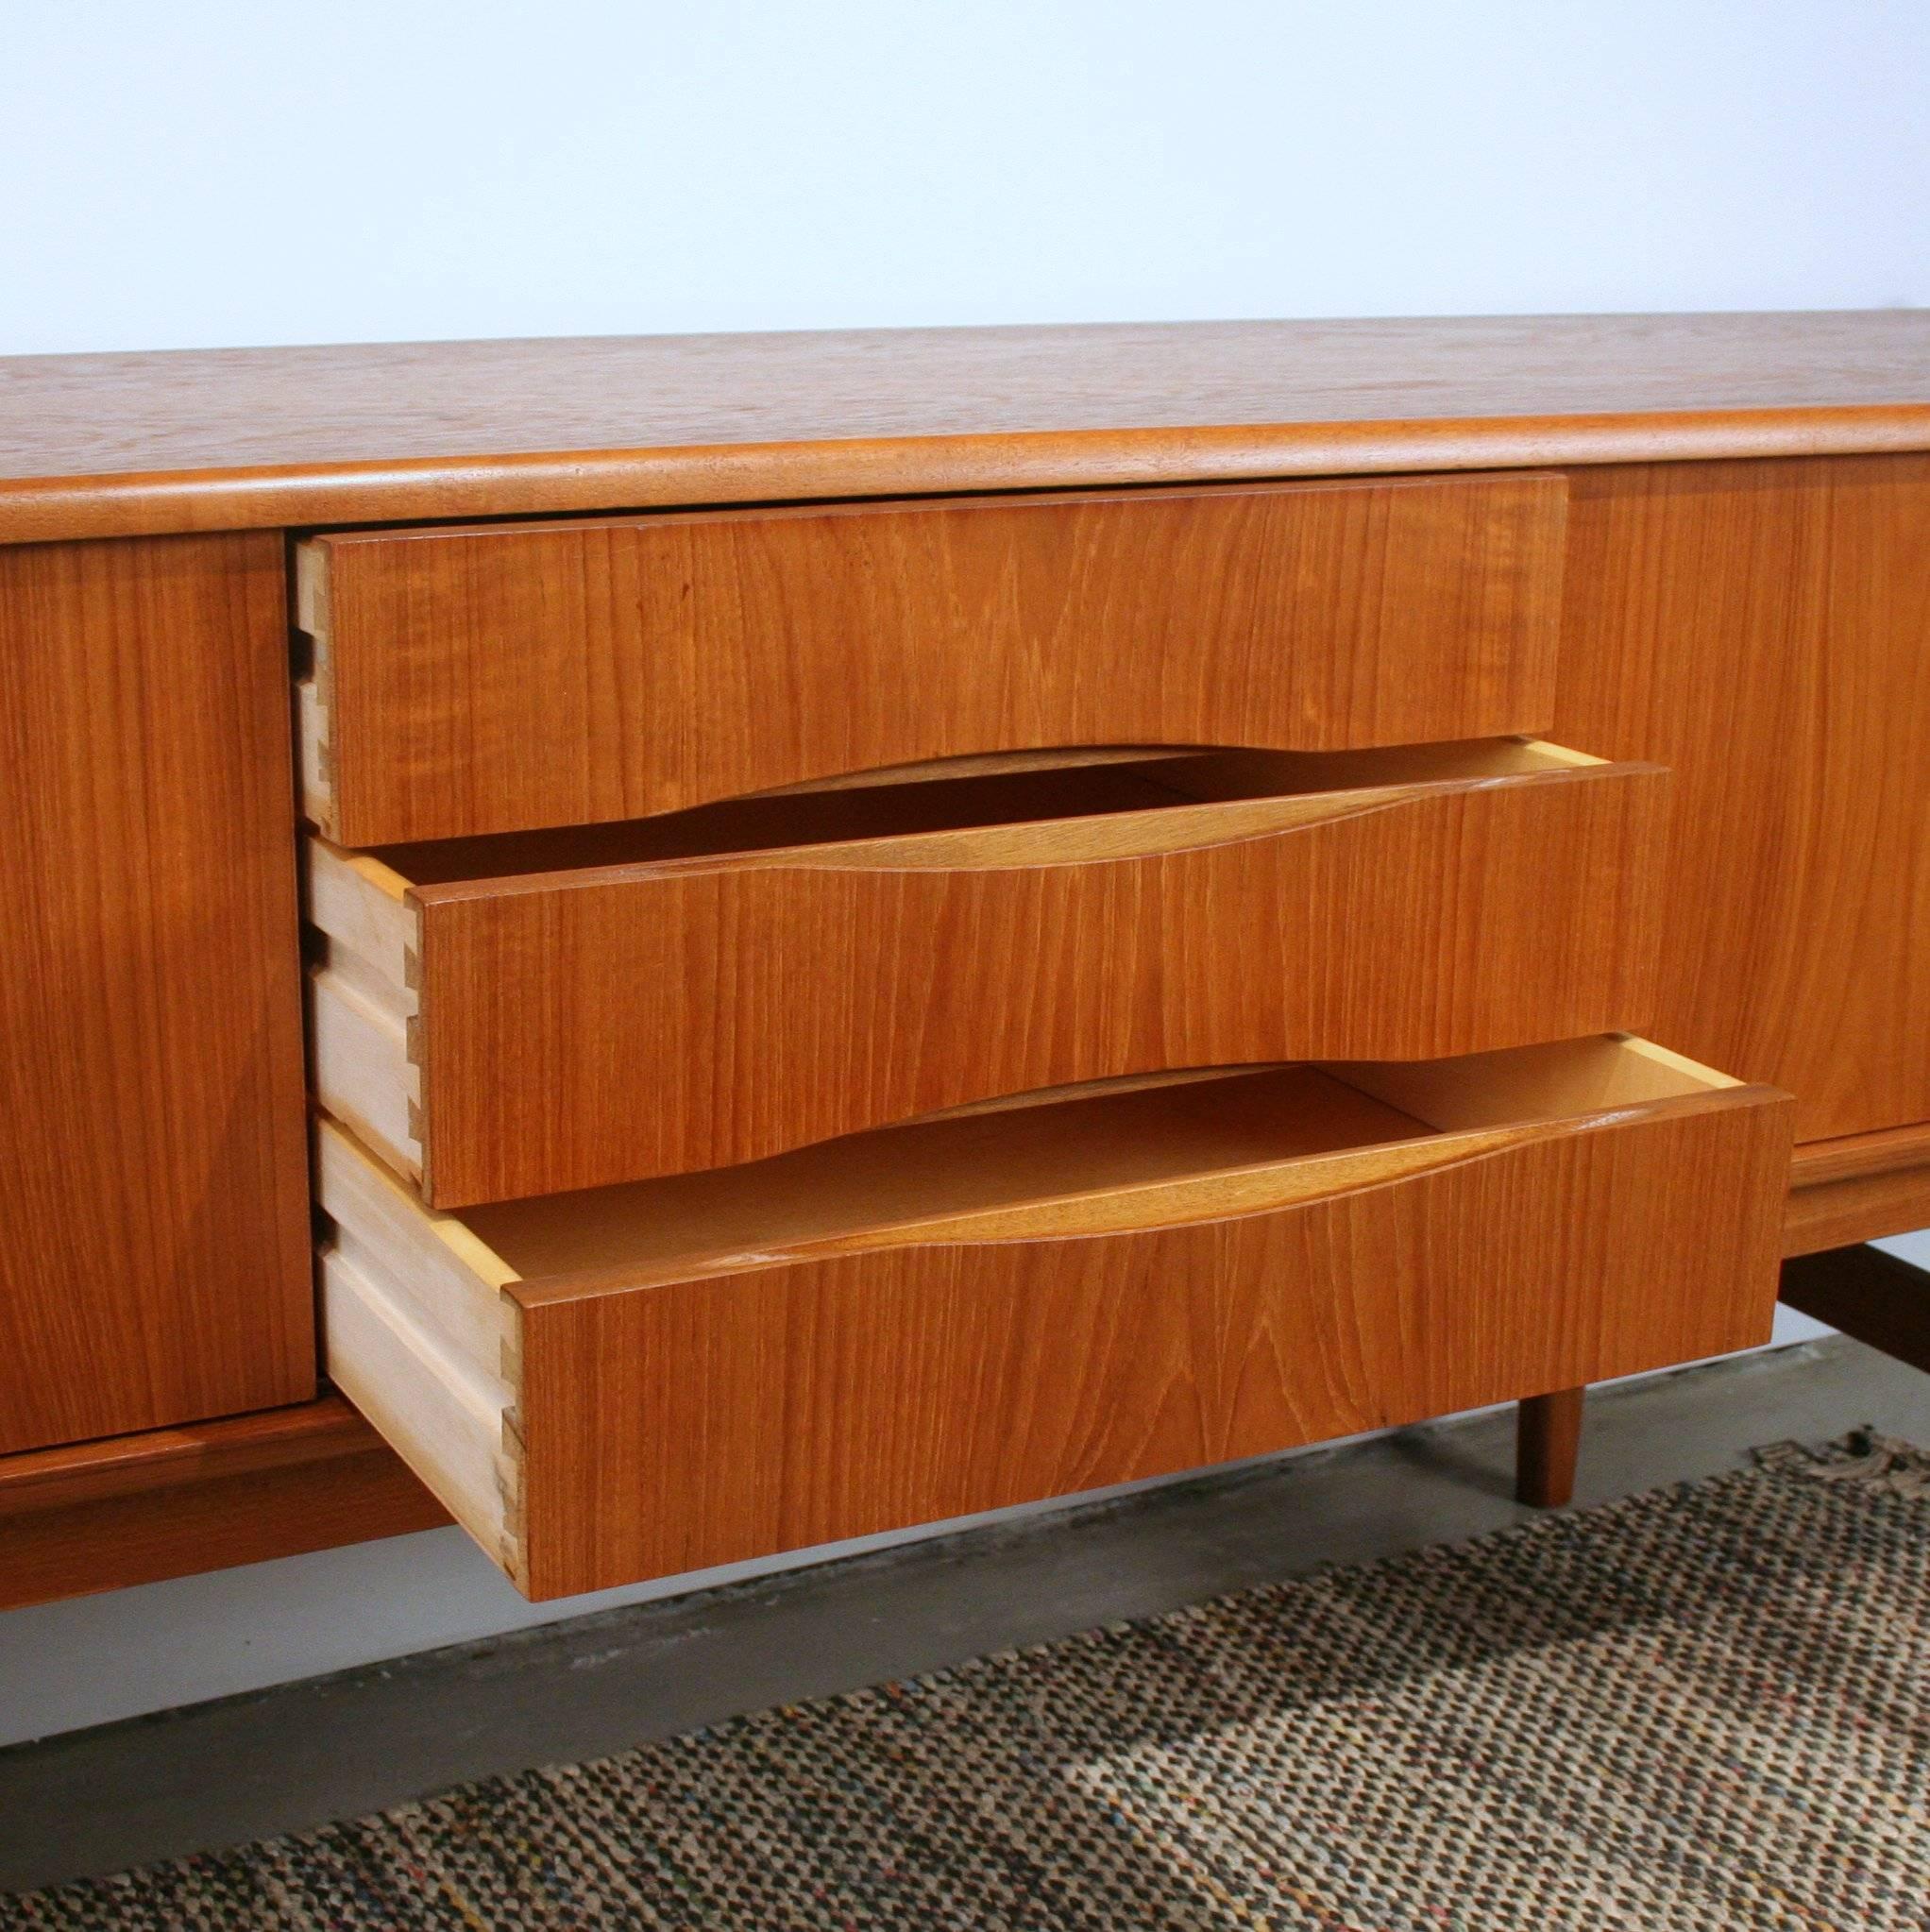 Vintage Danish Teak Sideboard In Excellent Condition For Sale In Vancouver, BC